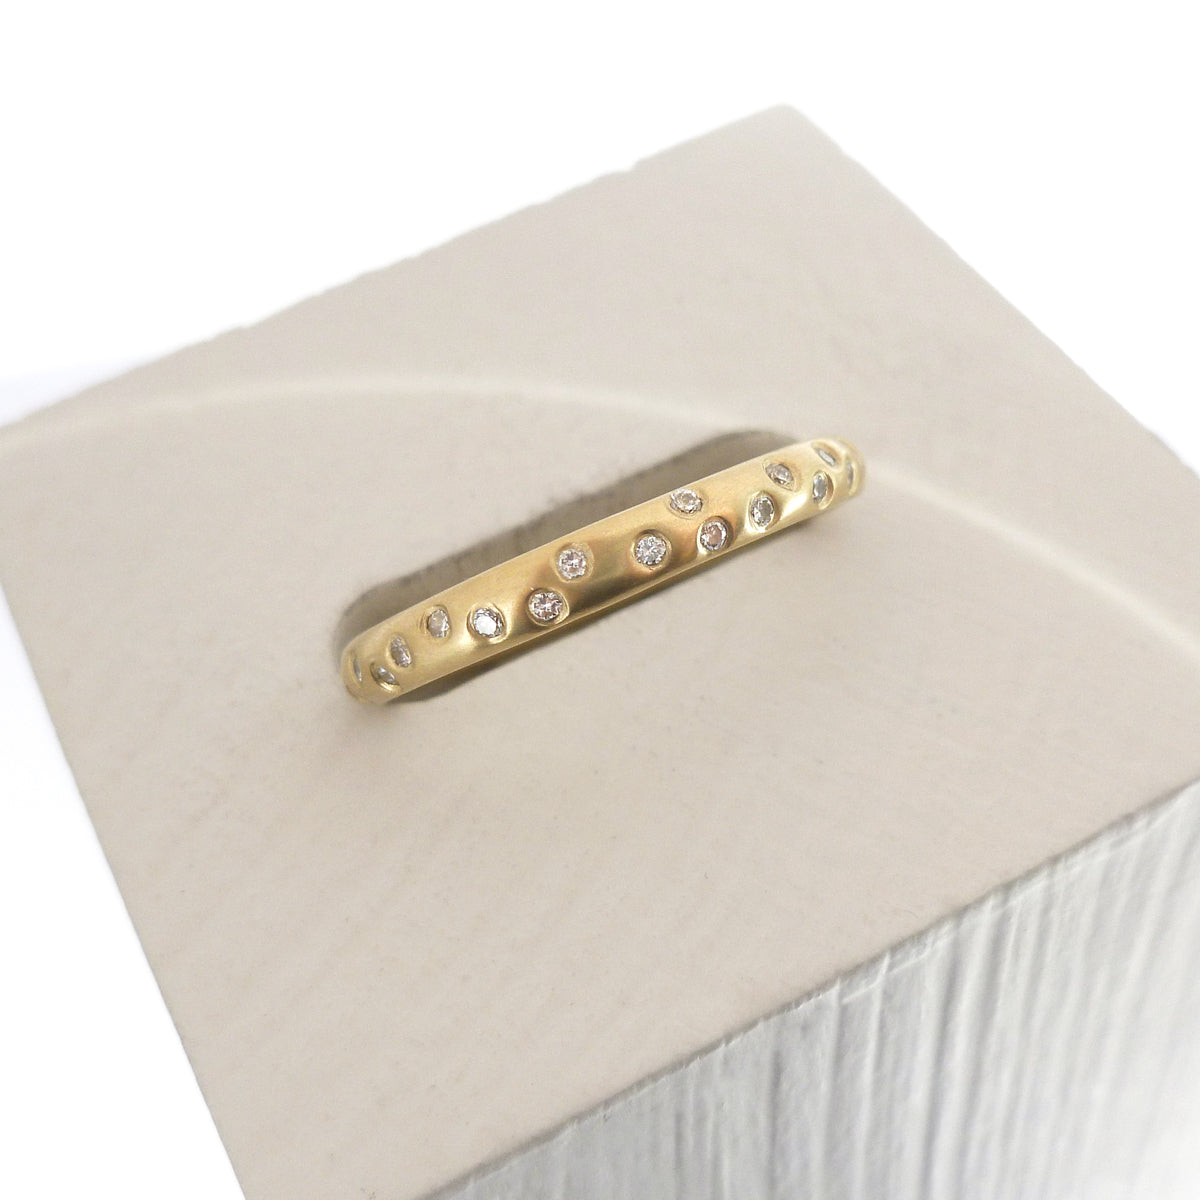 A modern, contemporary gold eternity ring, wedding ring, or engagement ring